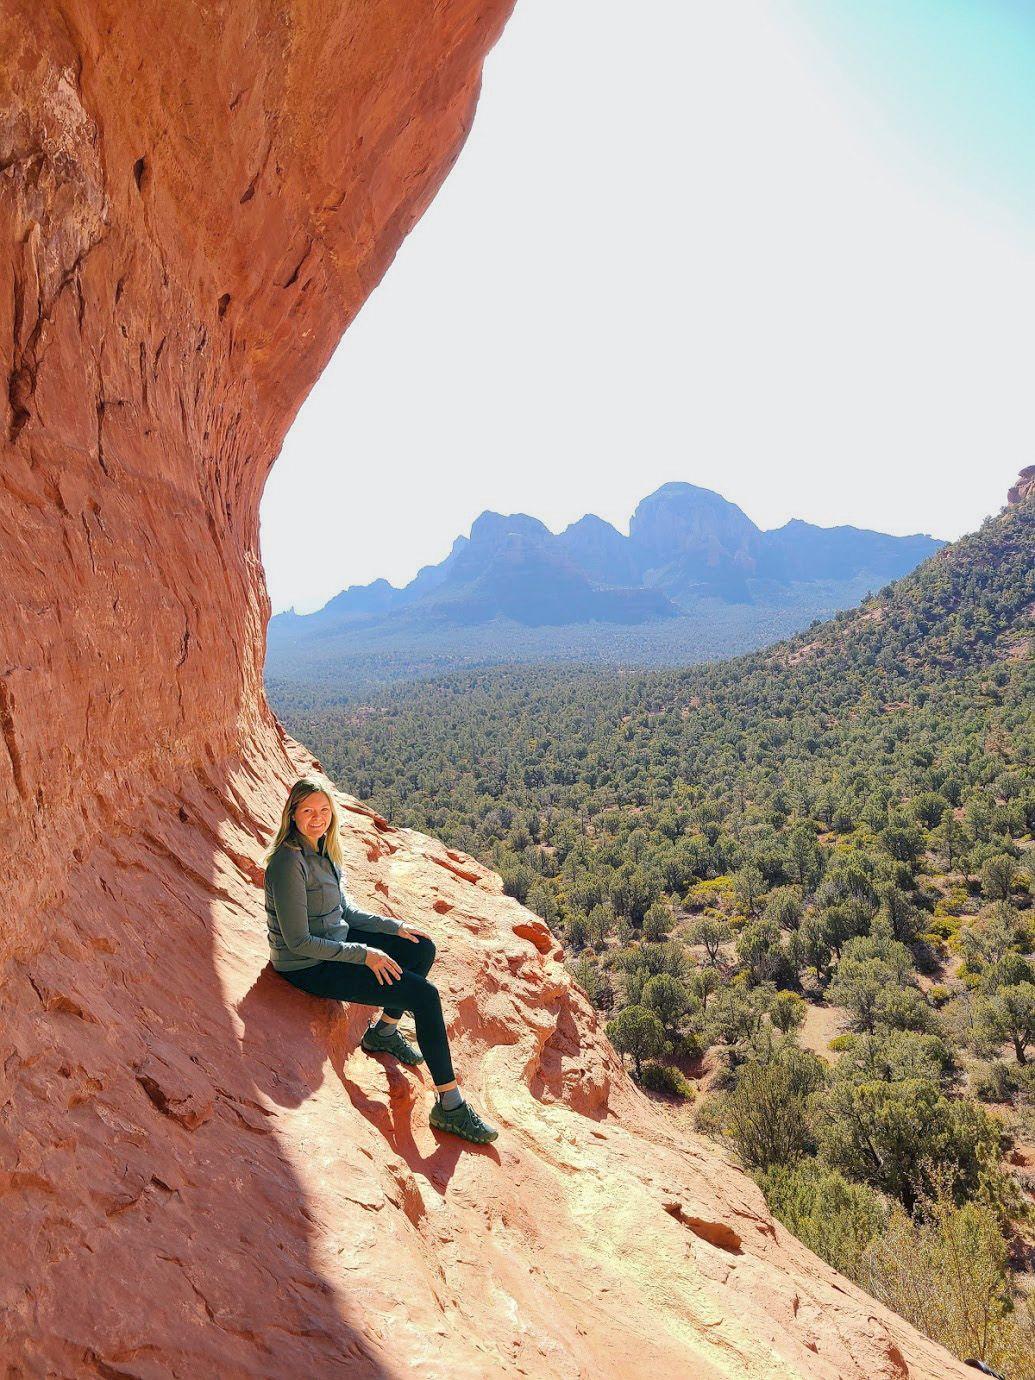 Lydia sitting on the side of the Birthing Cave with a view of mountains and trees behind her.